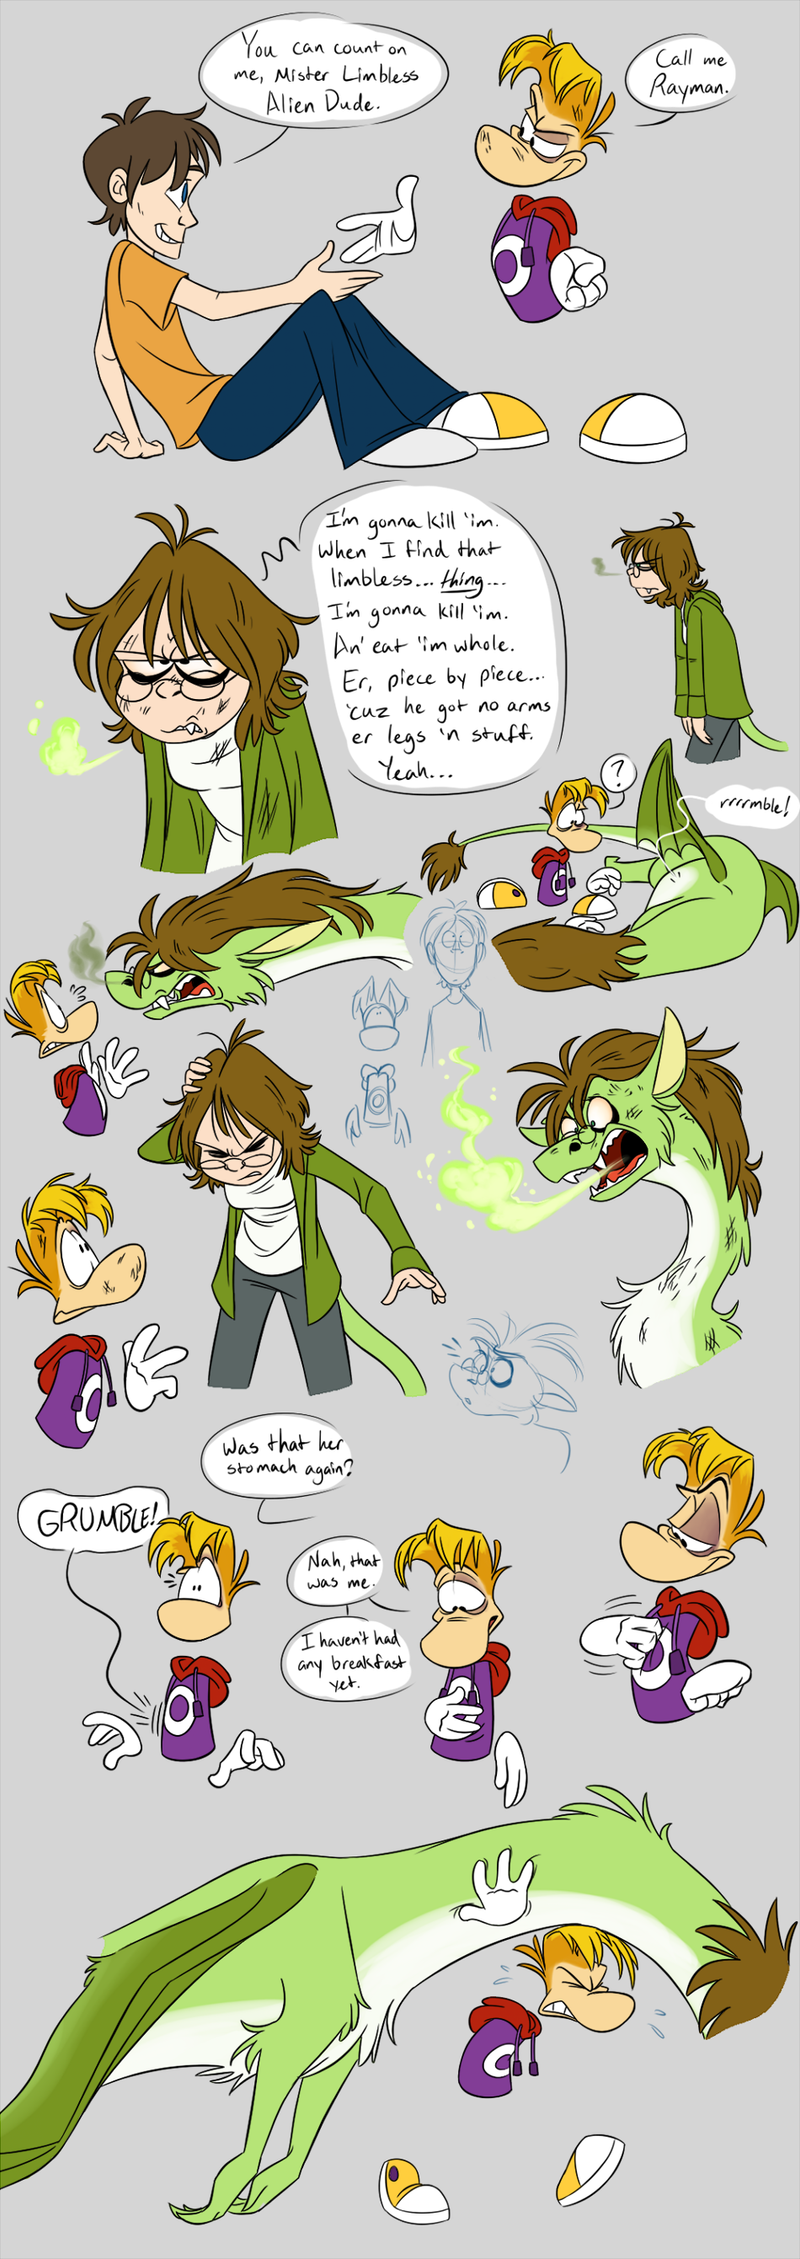 Rayman is Not Pleased by EarthGwee on DeviantArt